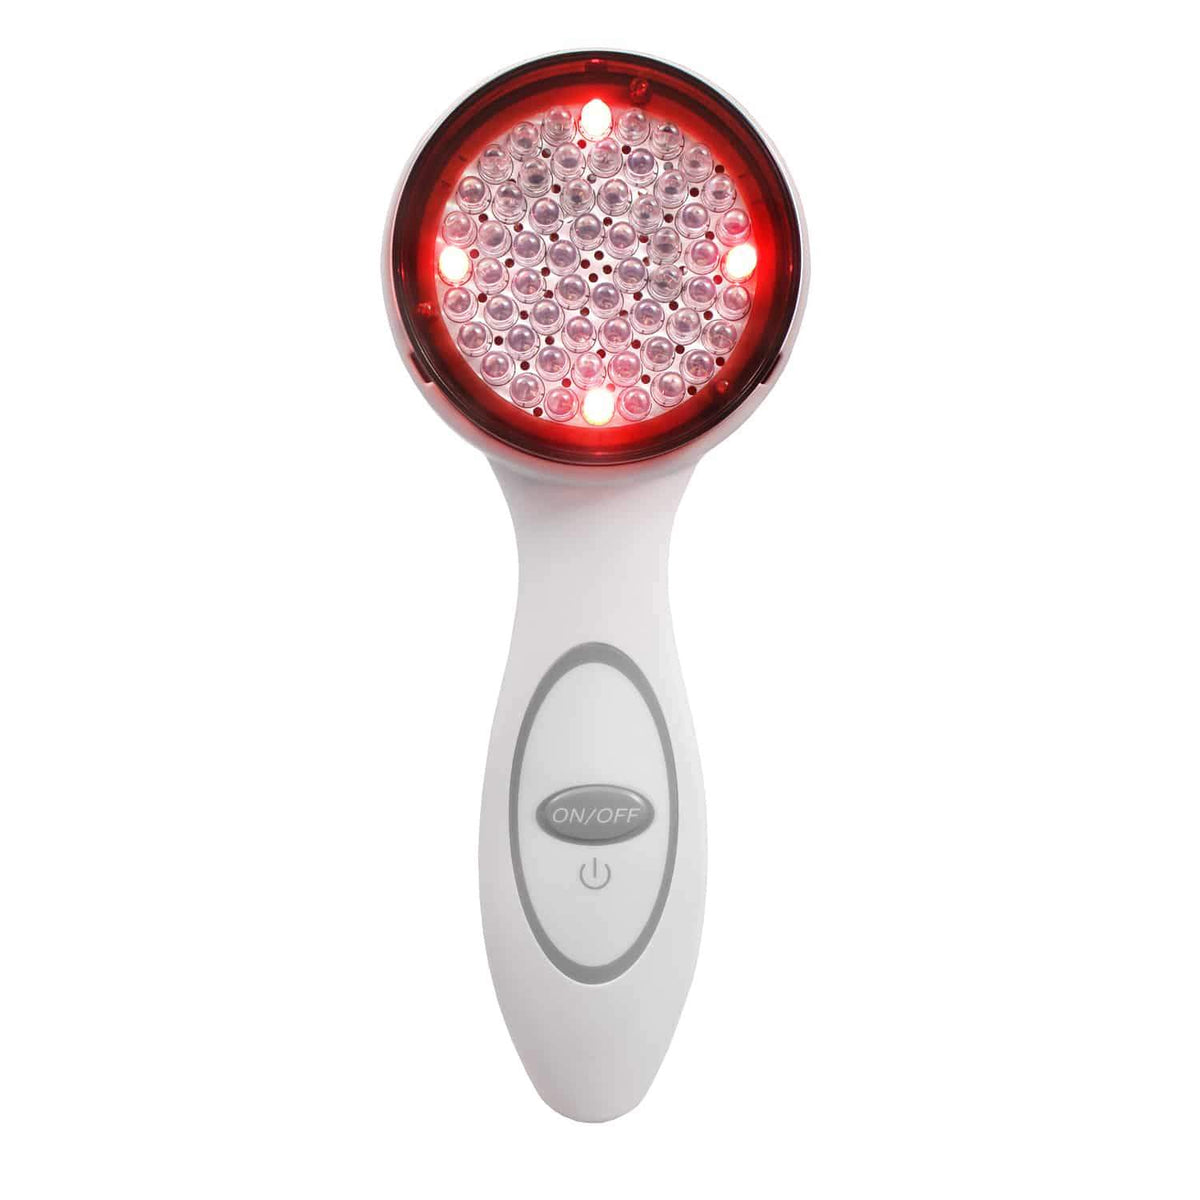 A red light therapy device